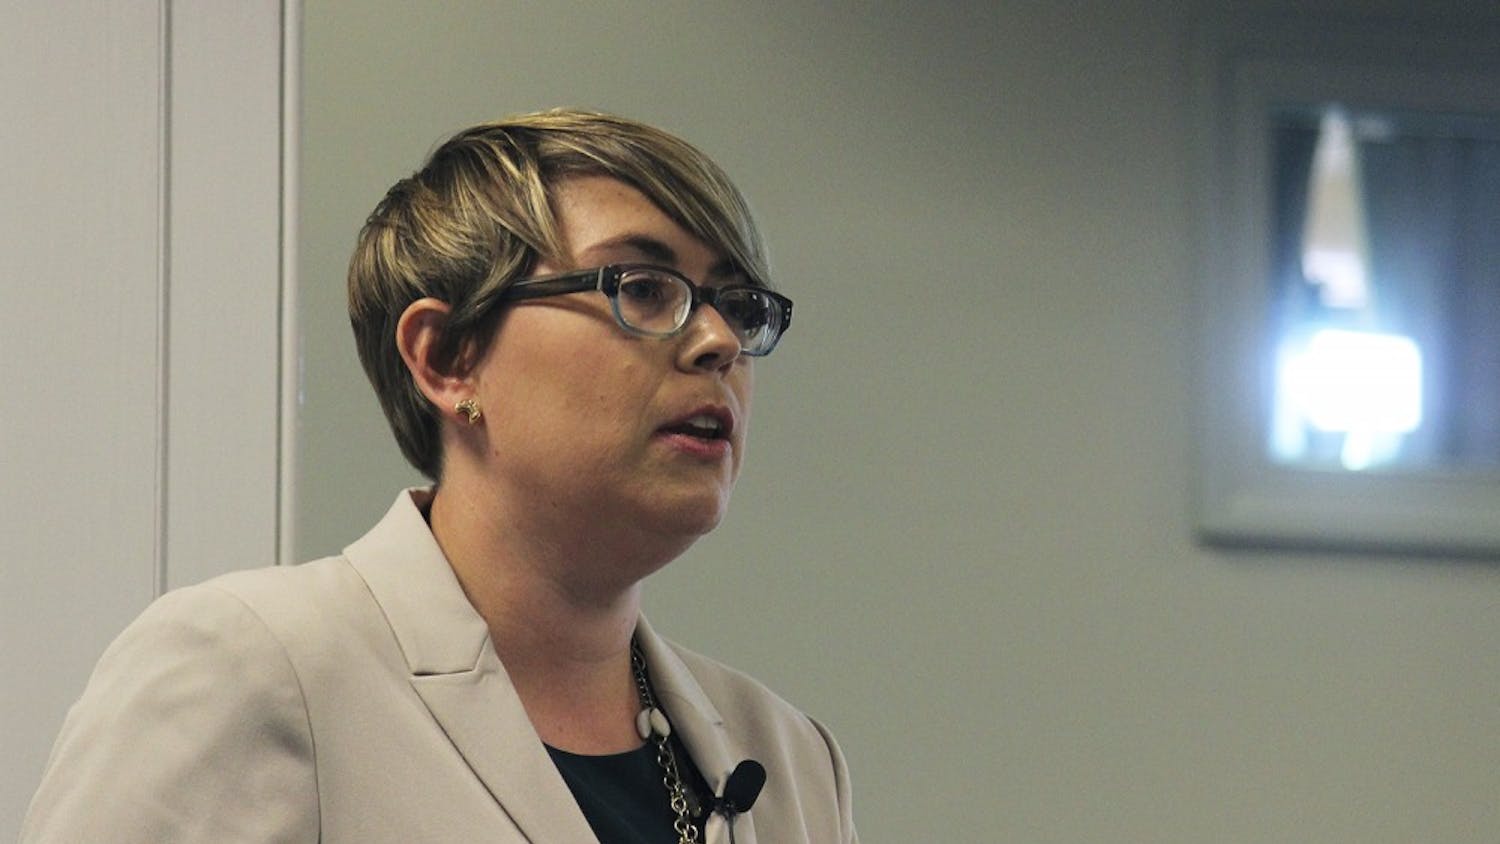 Cordelia Heaney, a candidate for director of the Carolina Women’s Center, presented her plan at a public forum Tuesday.